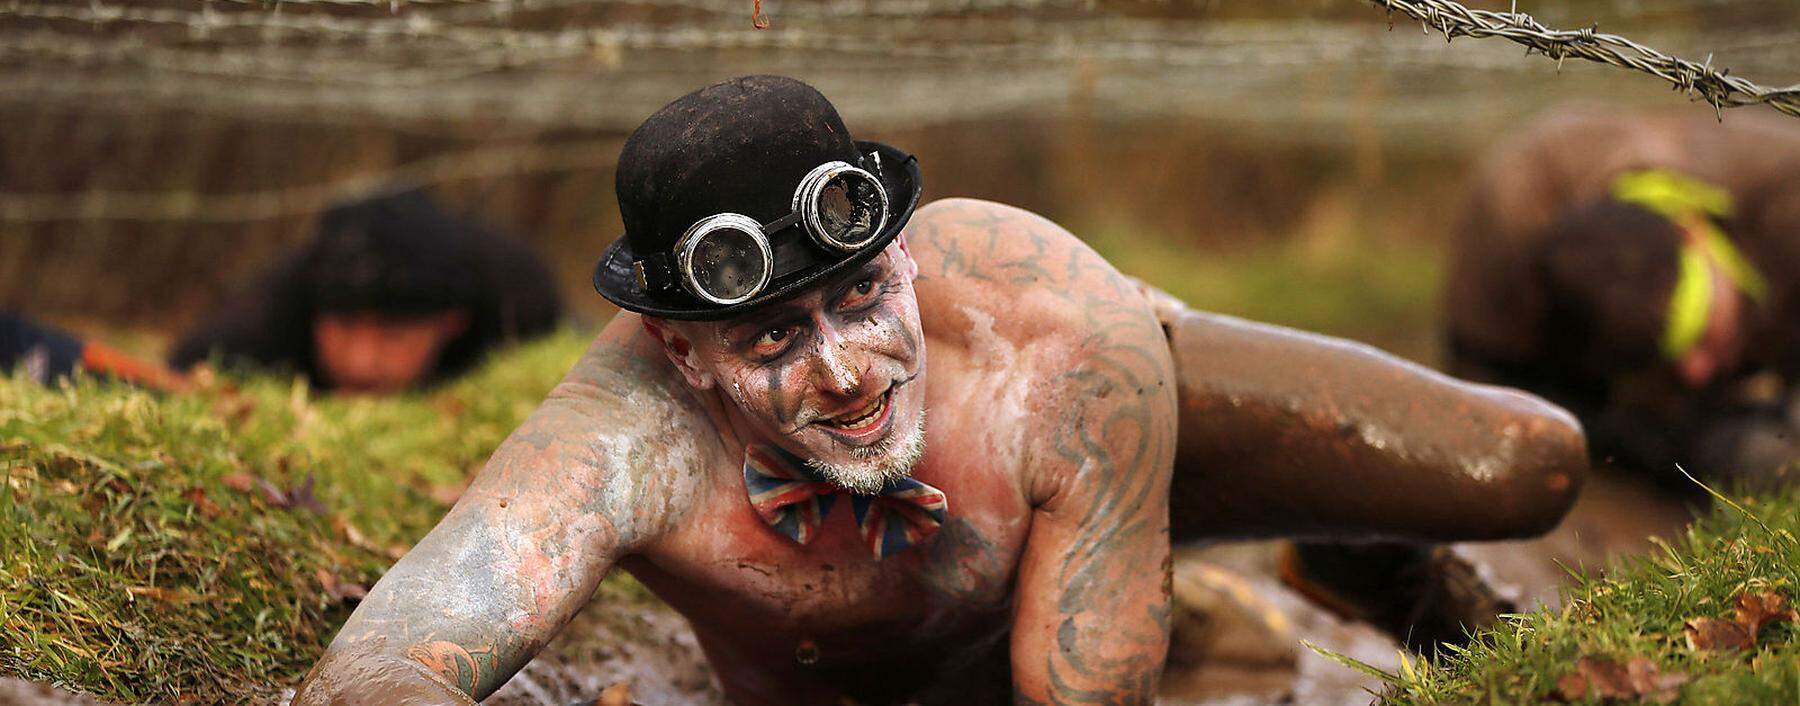 A competitor crawls beneath barbed wire during the Tough Guy event in Perton, central England